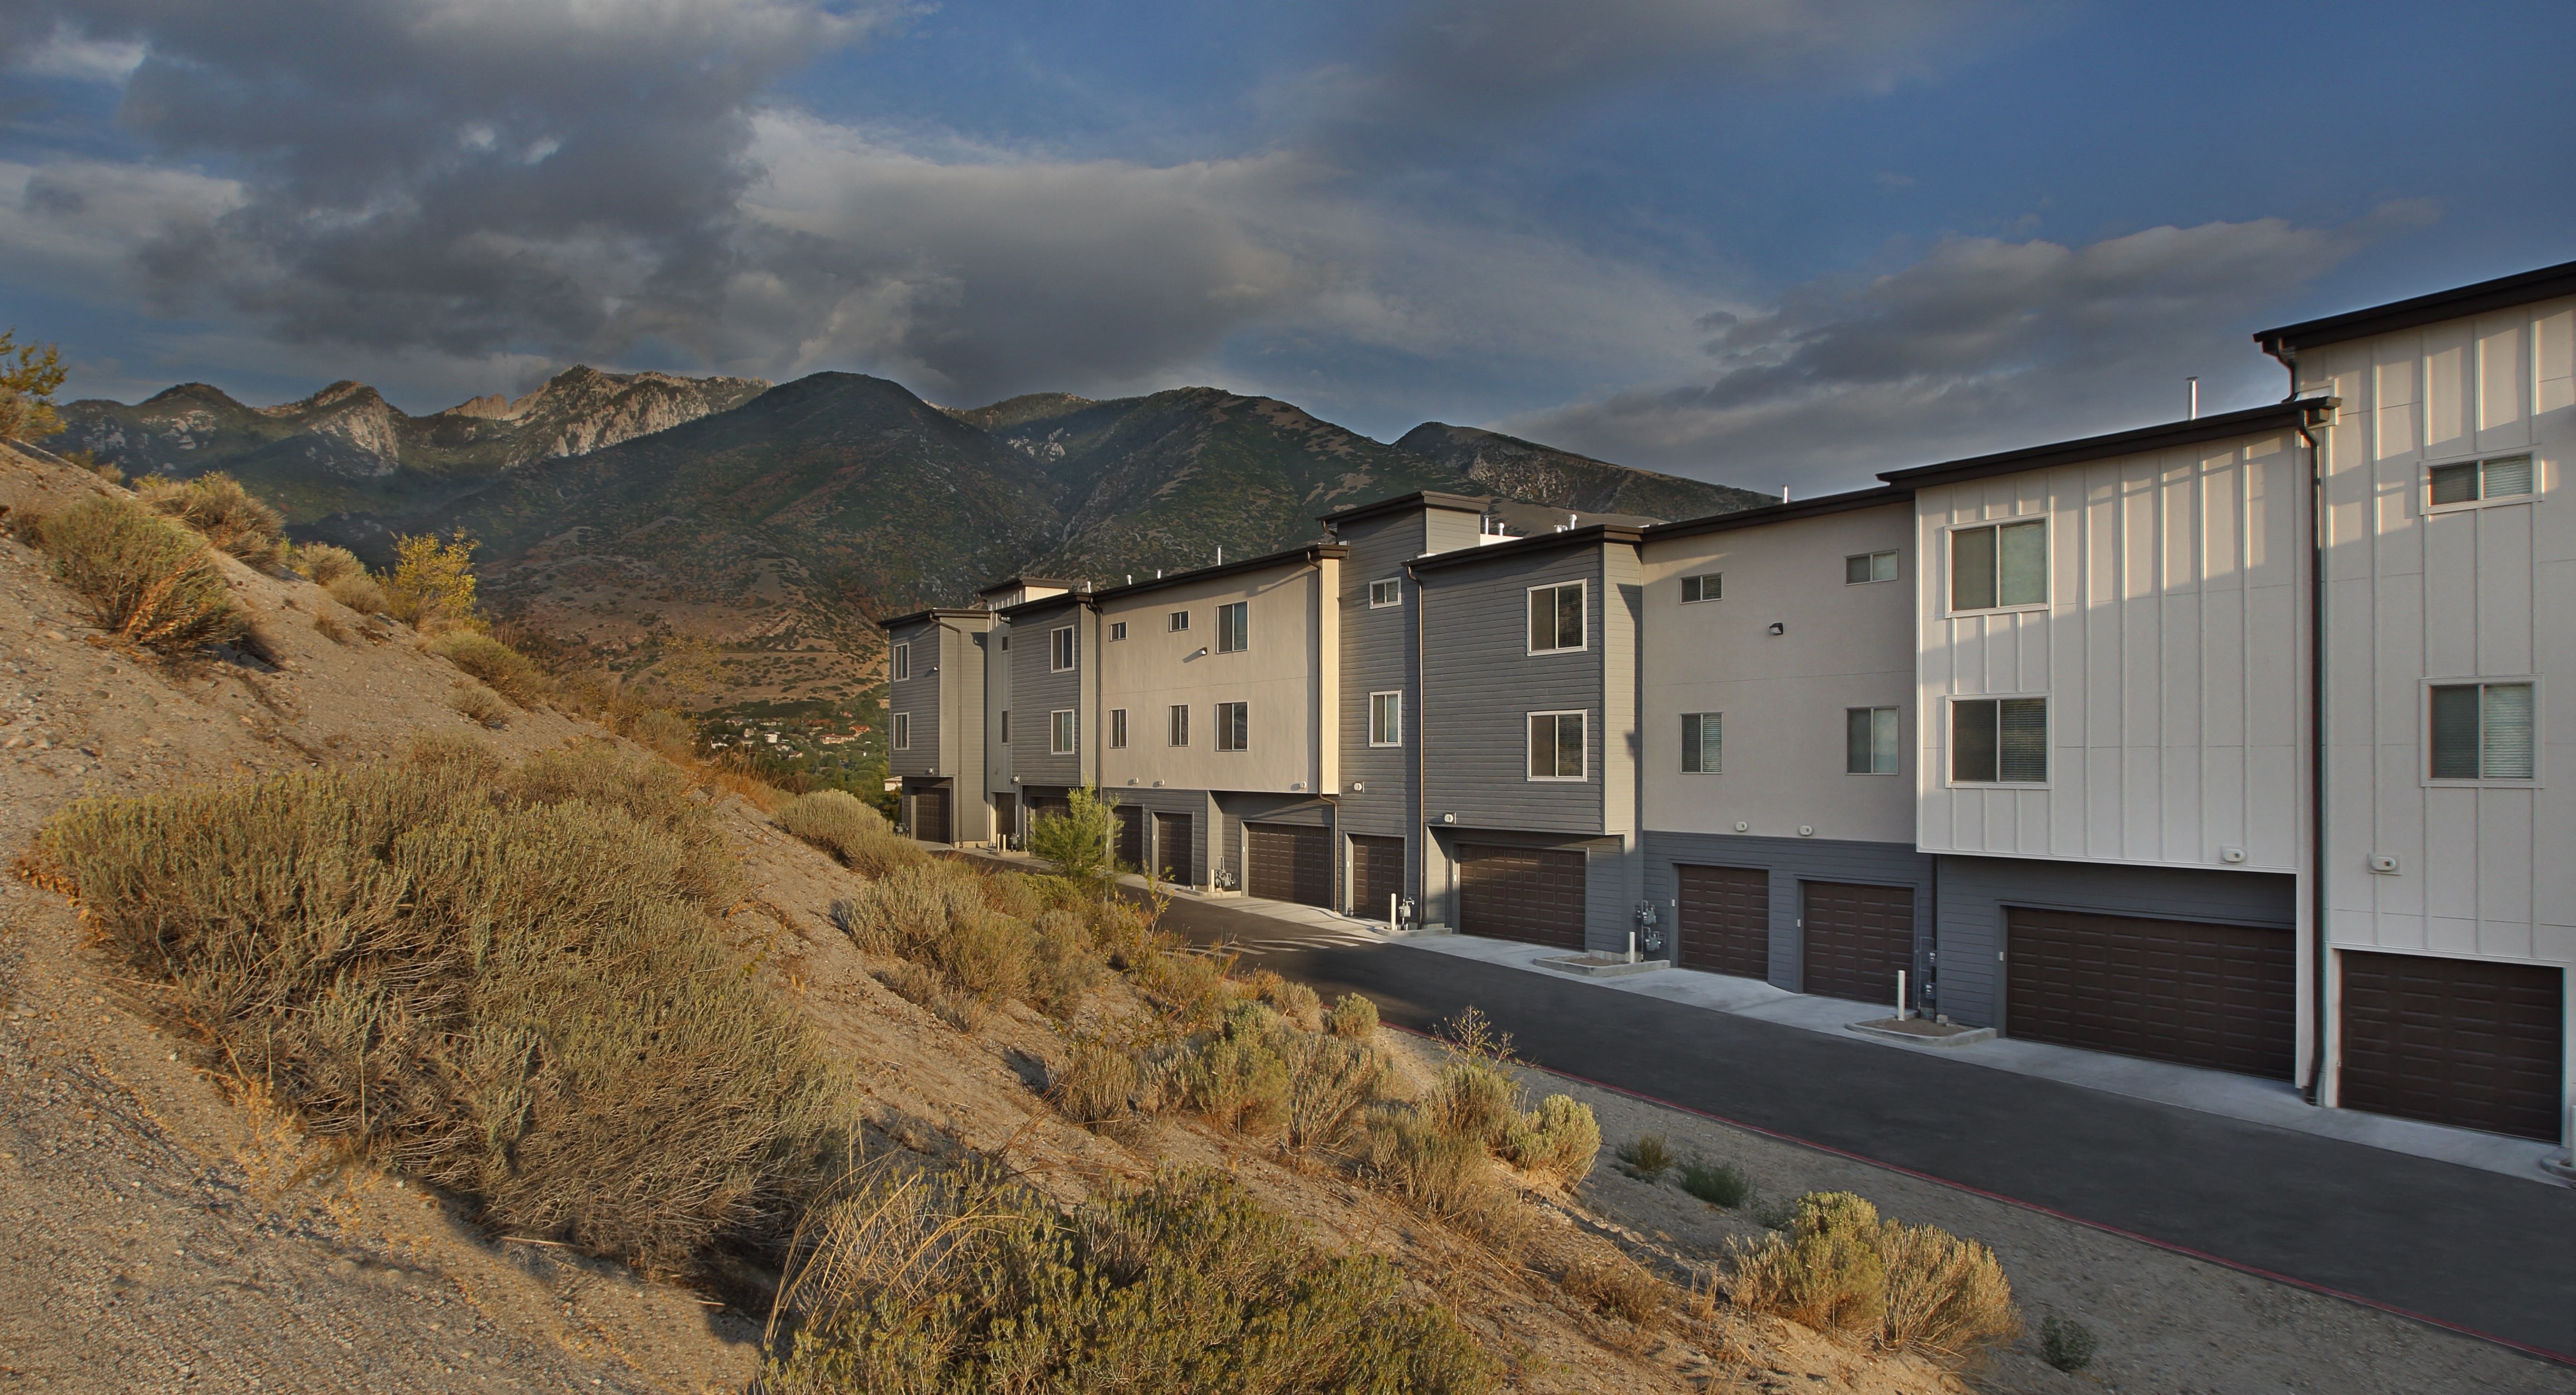 Townhome garages at Liberty Point Apartments, Draper, UT